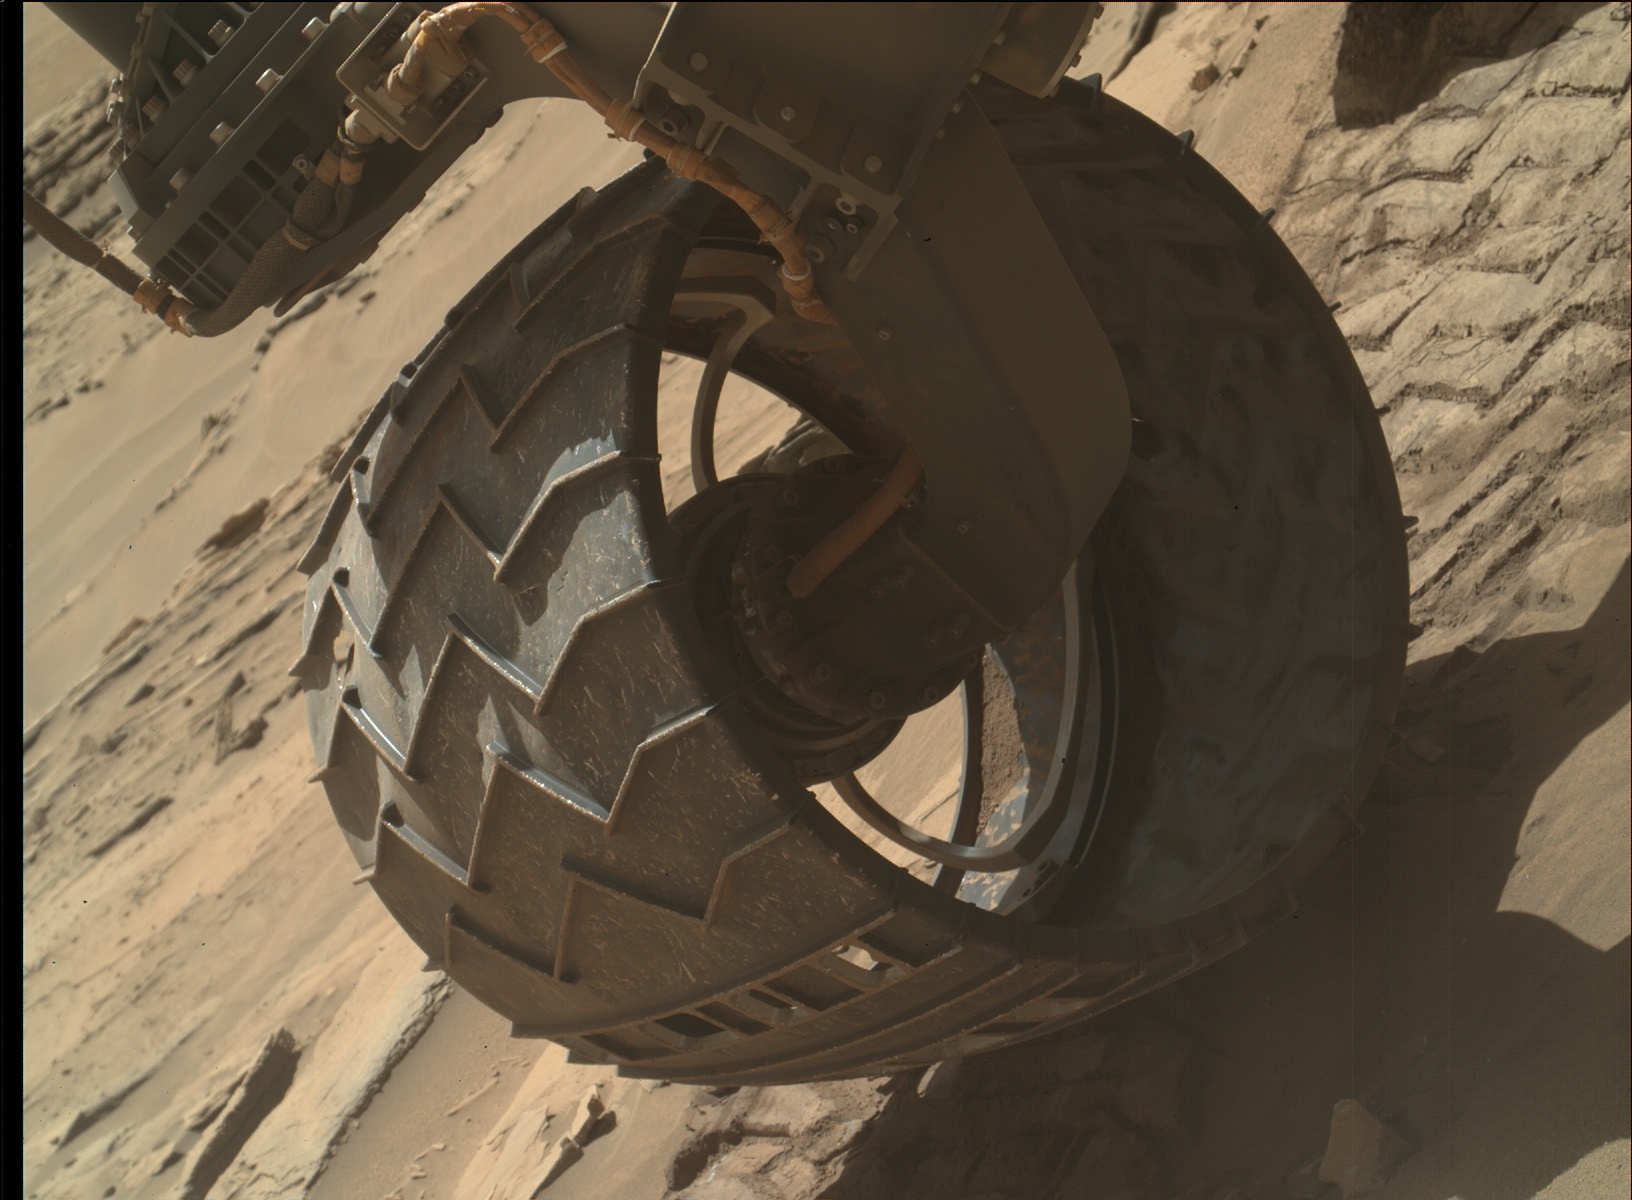 Nasa's Mars rover Curiosity acquired this image using its Mars Hand Lens Imager (MAHLI) on Sol 1315